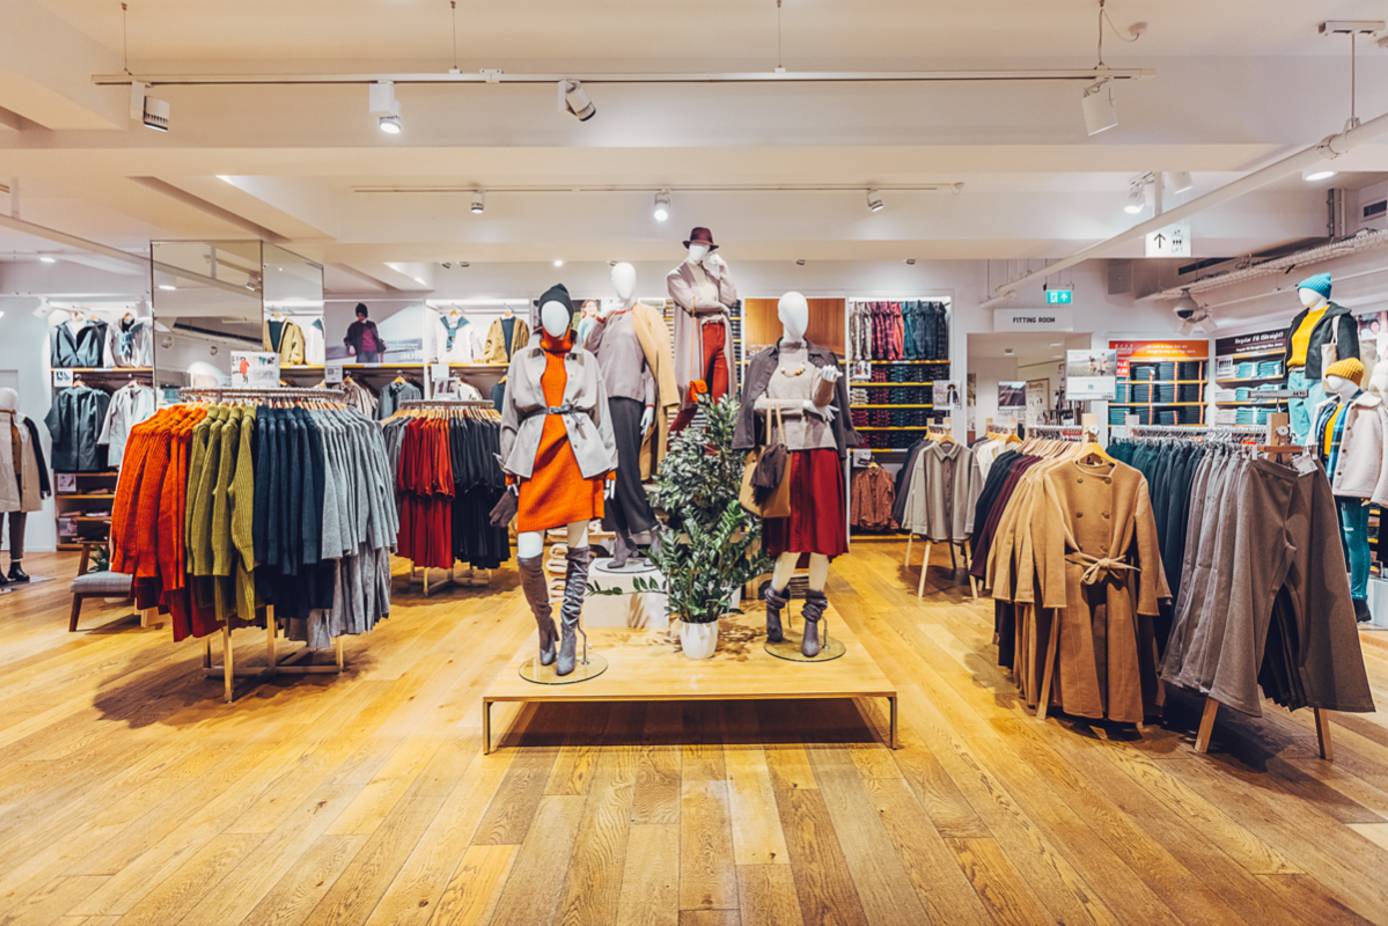 bidden Gewend rijkdom Fast Retailing to expand LifeWear concept to support sustainability growth